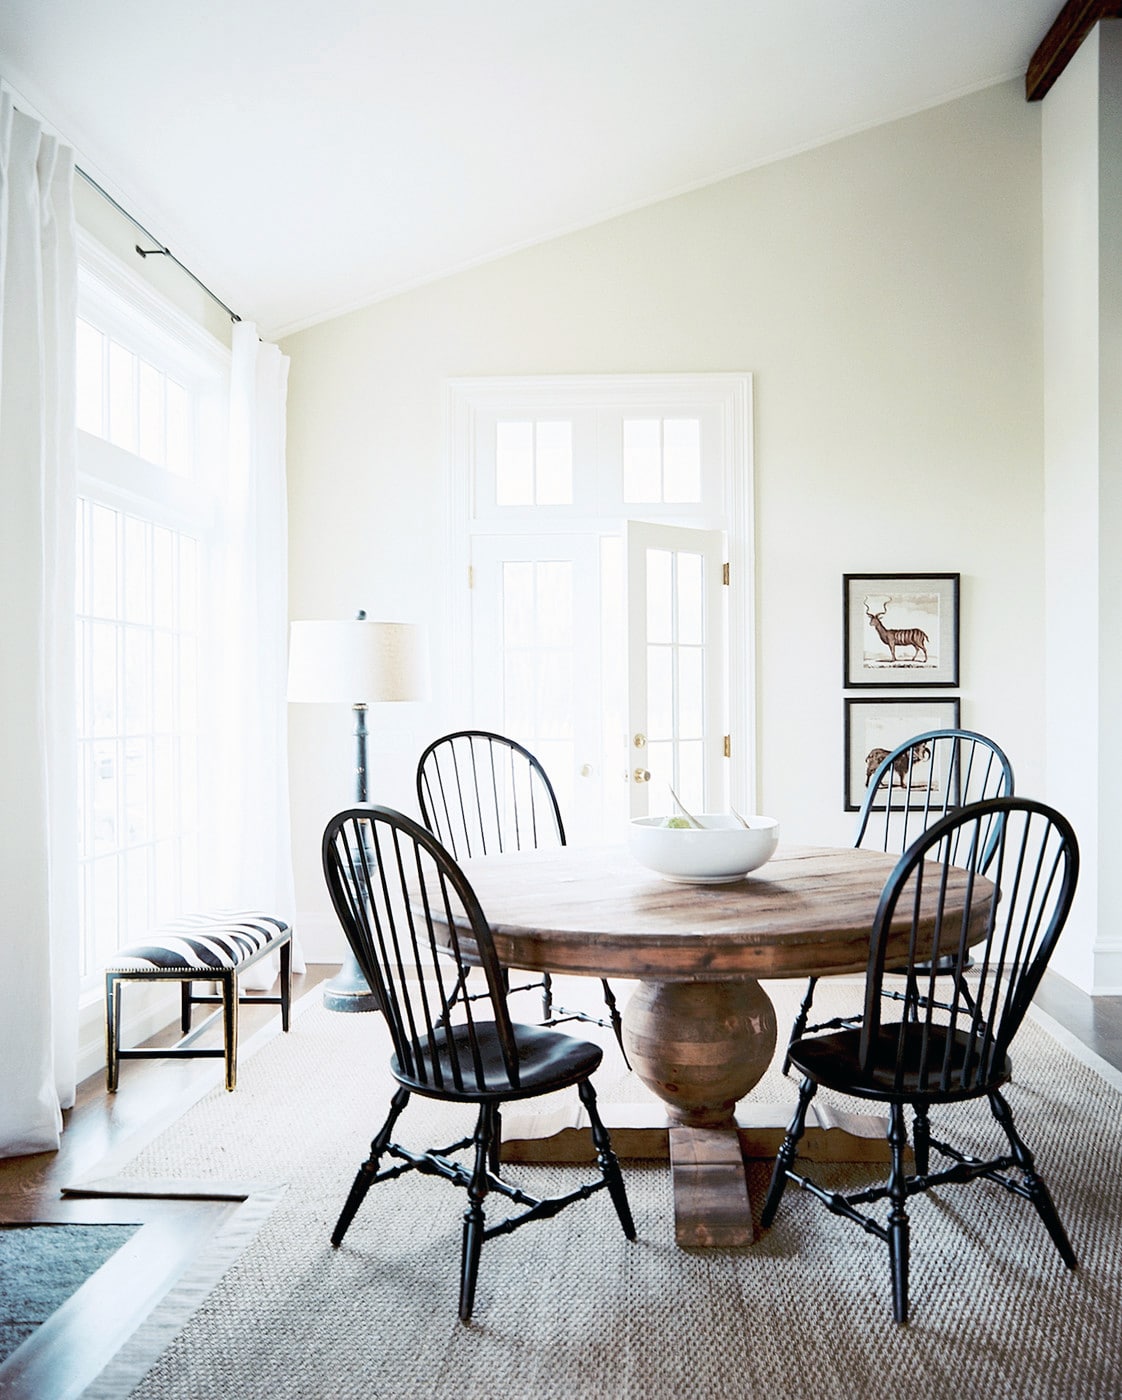 classic pedestal dining table with windsor chairs lonny magazine | via cocokelley